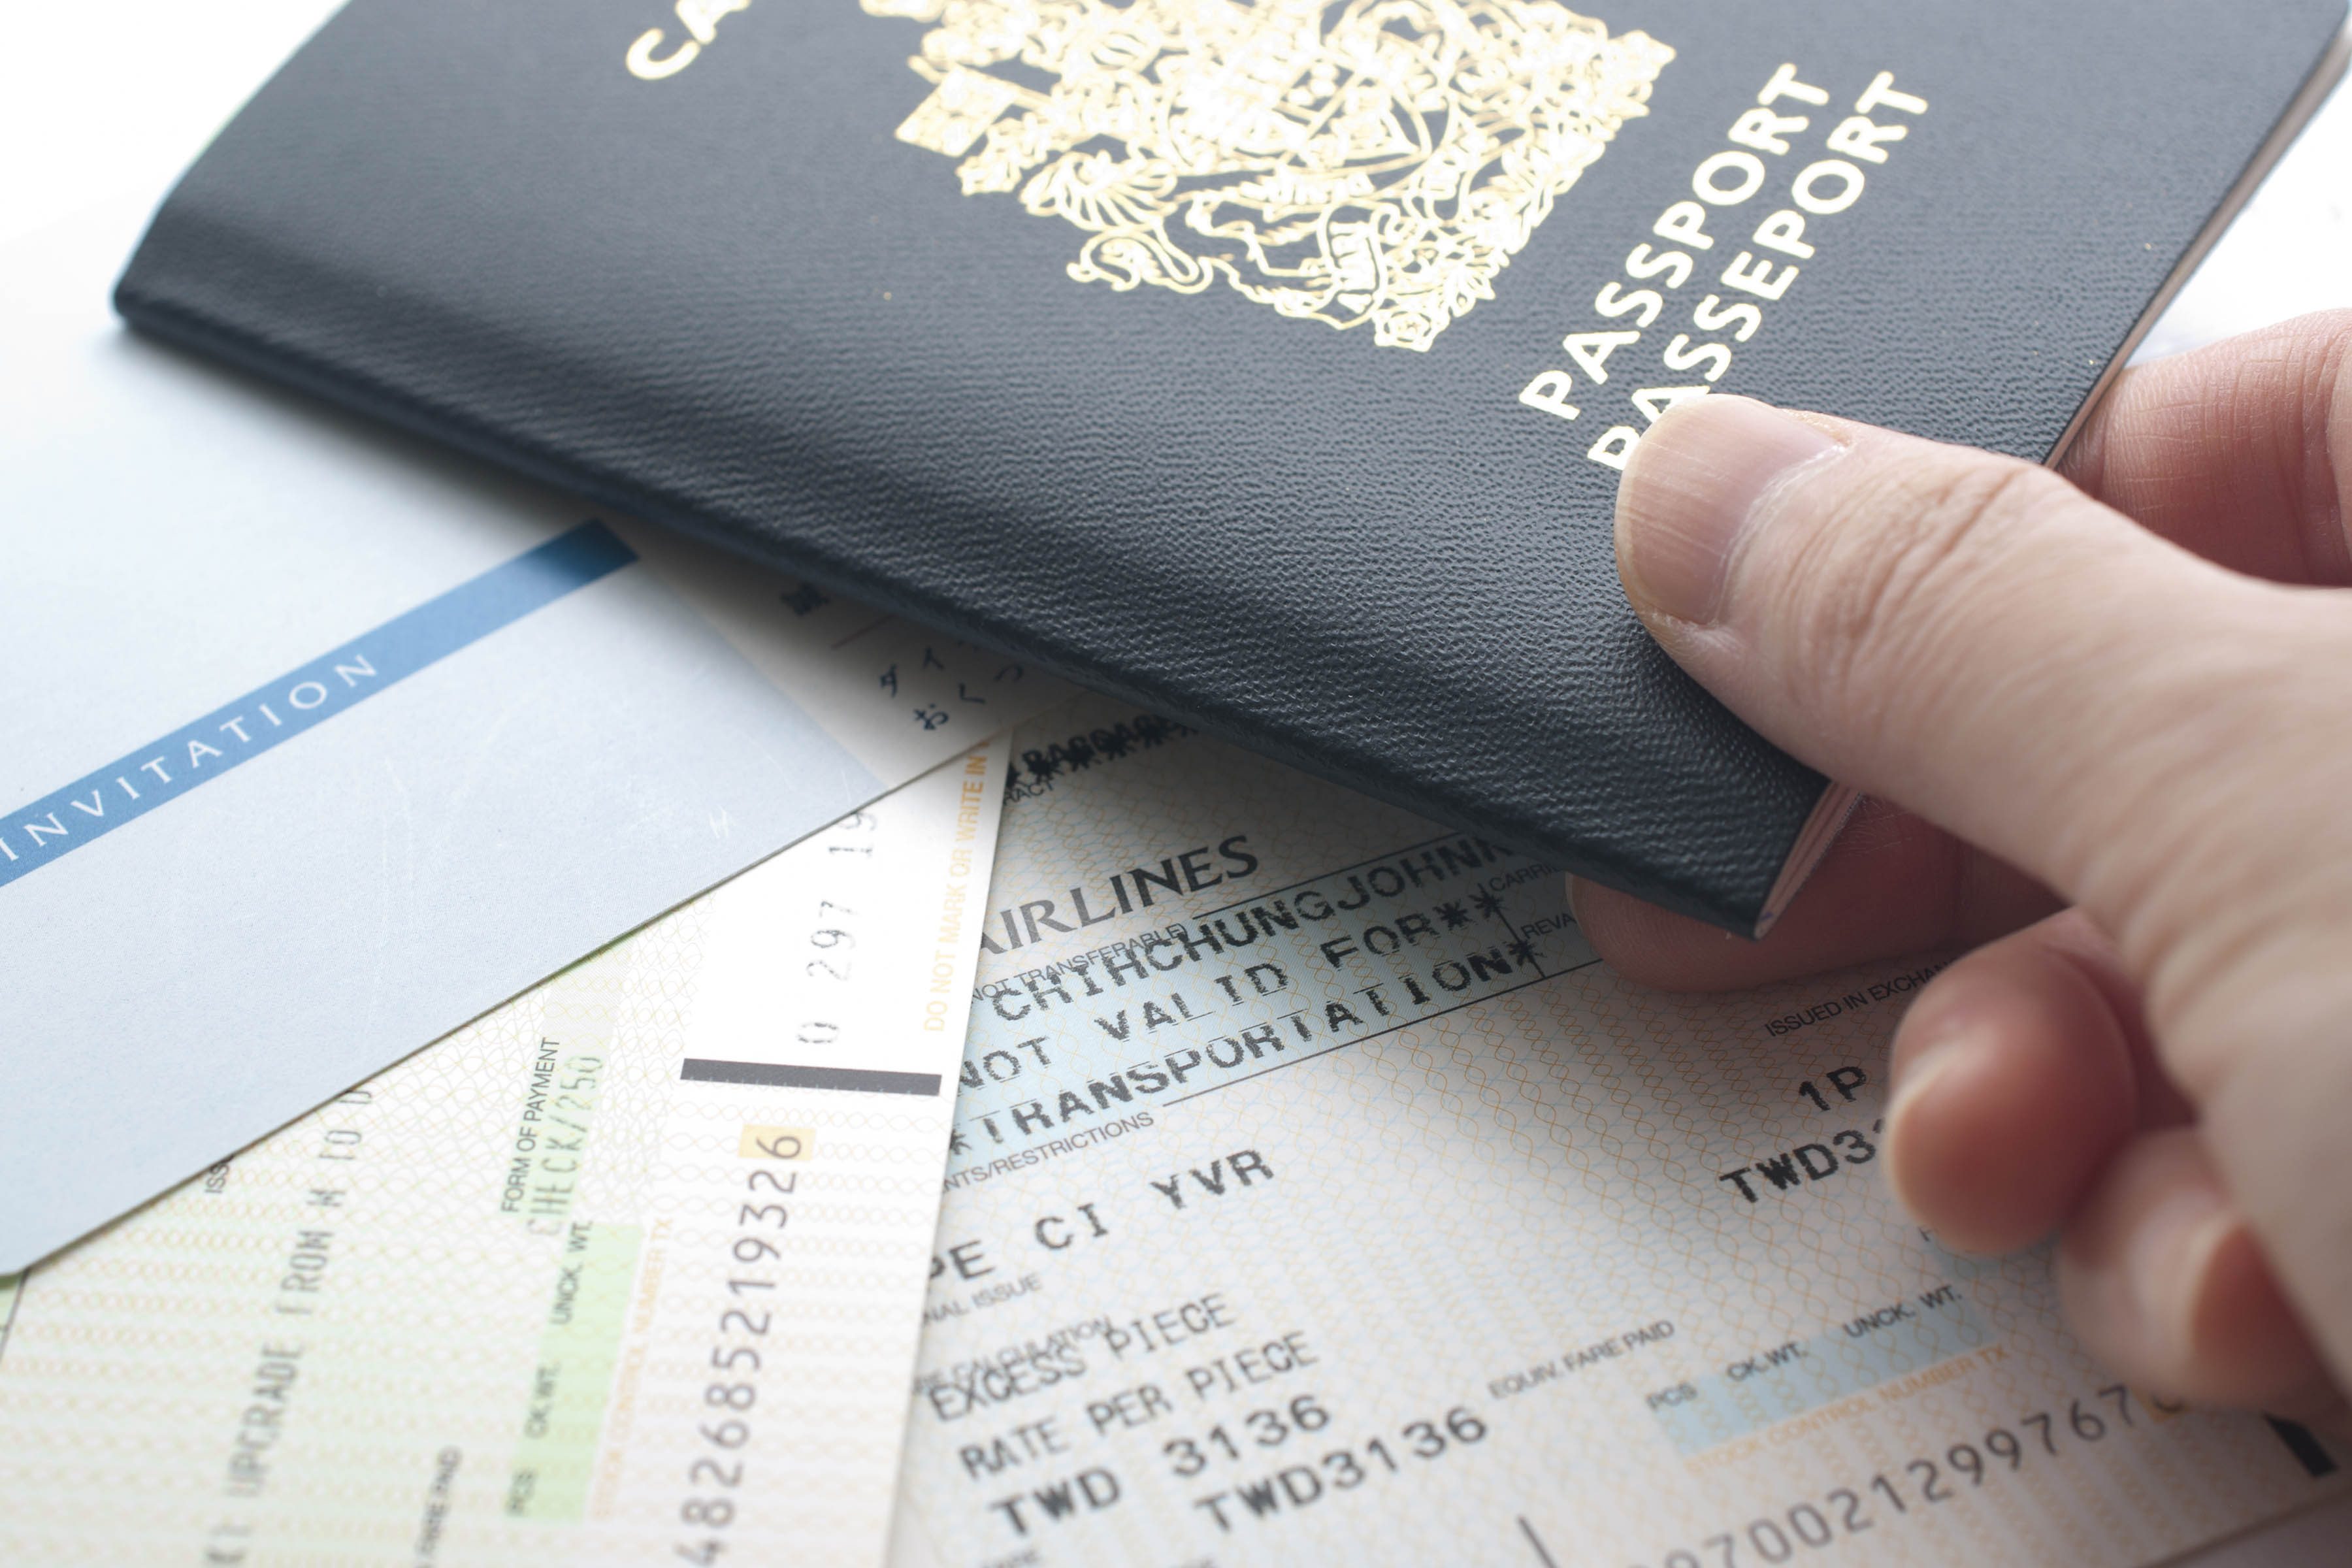 Canadian passport and boarding pass